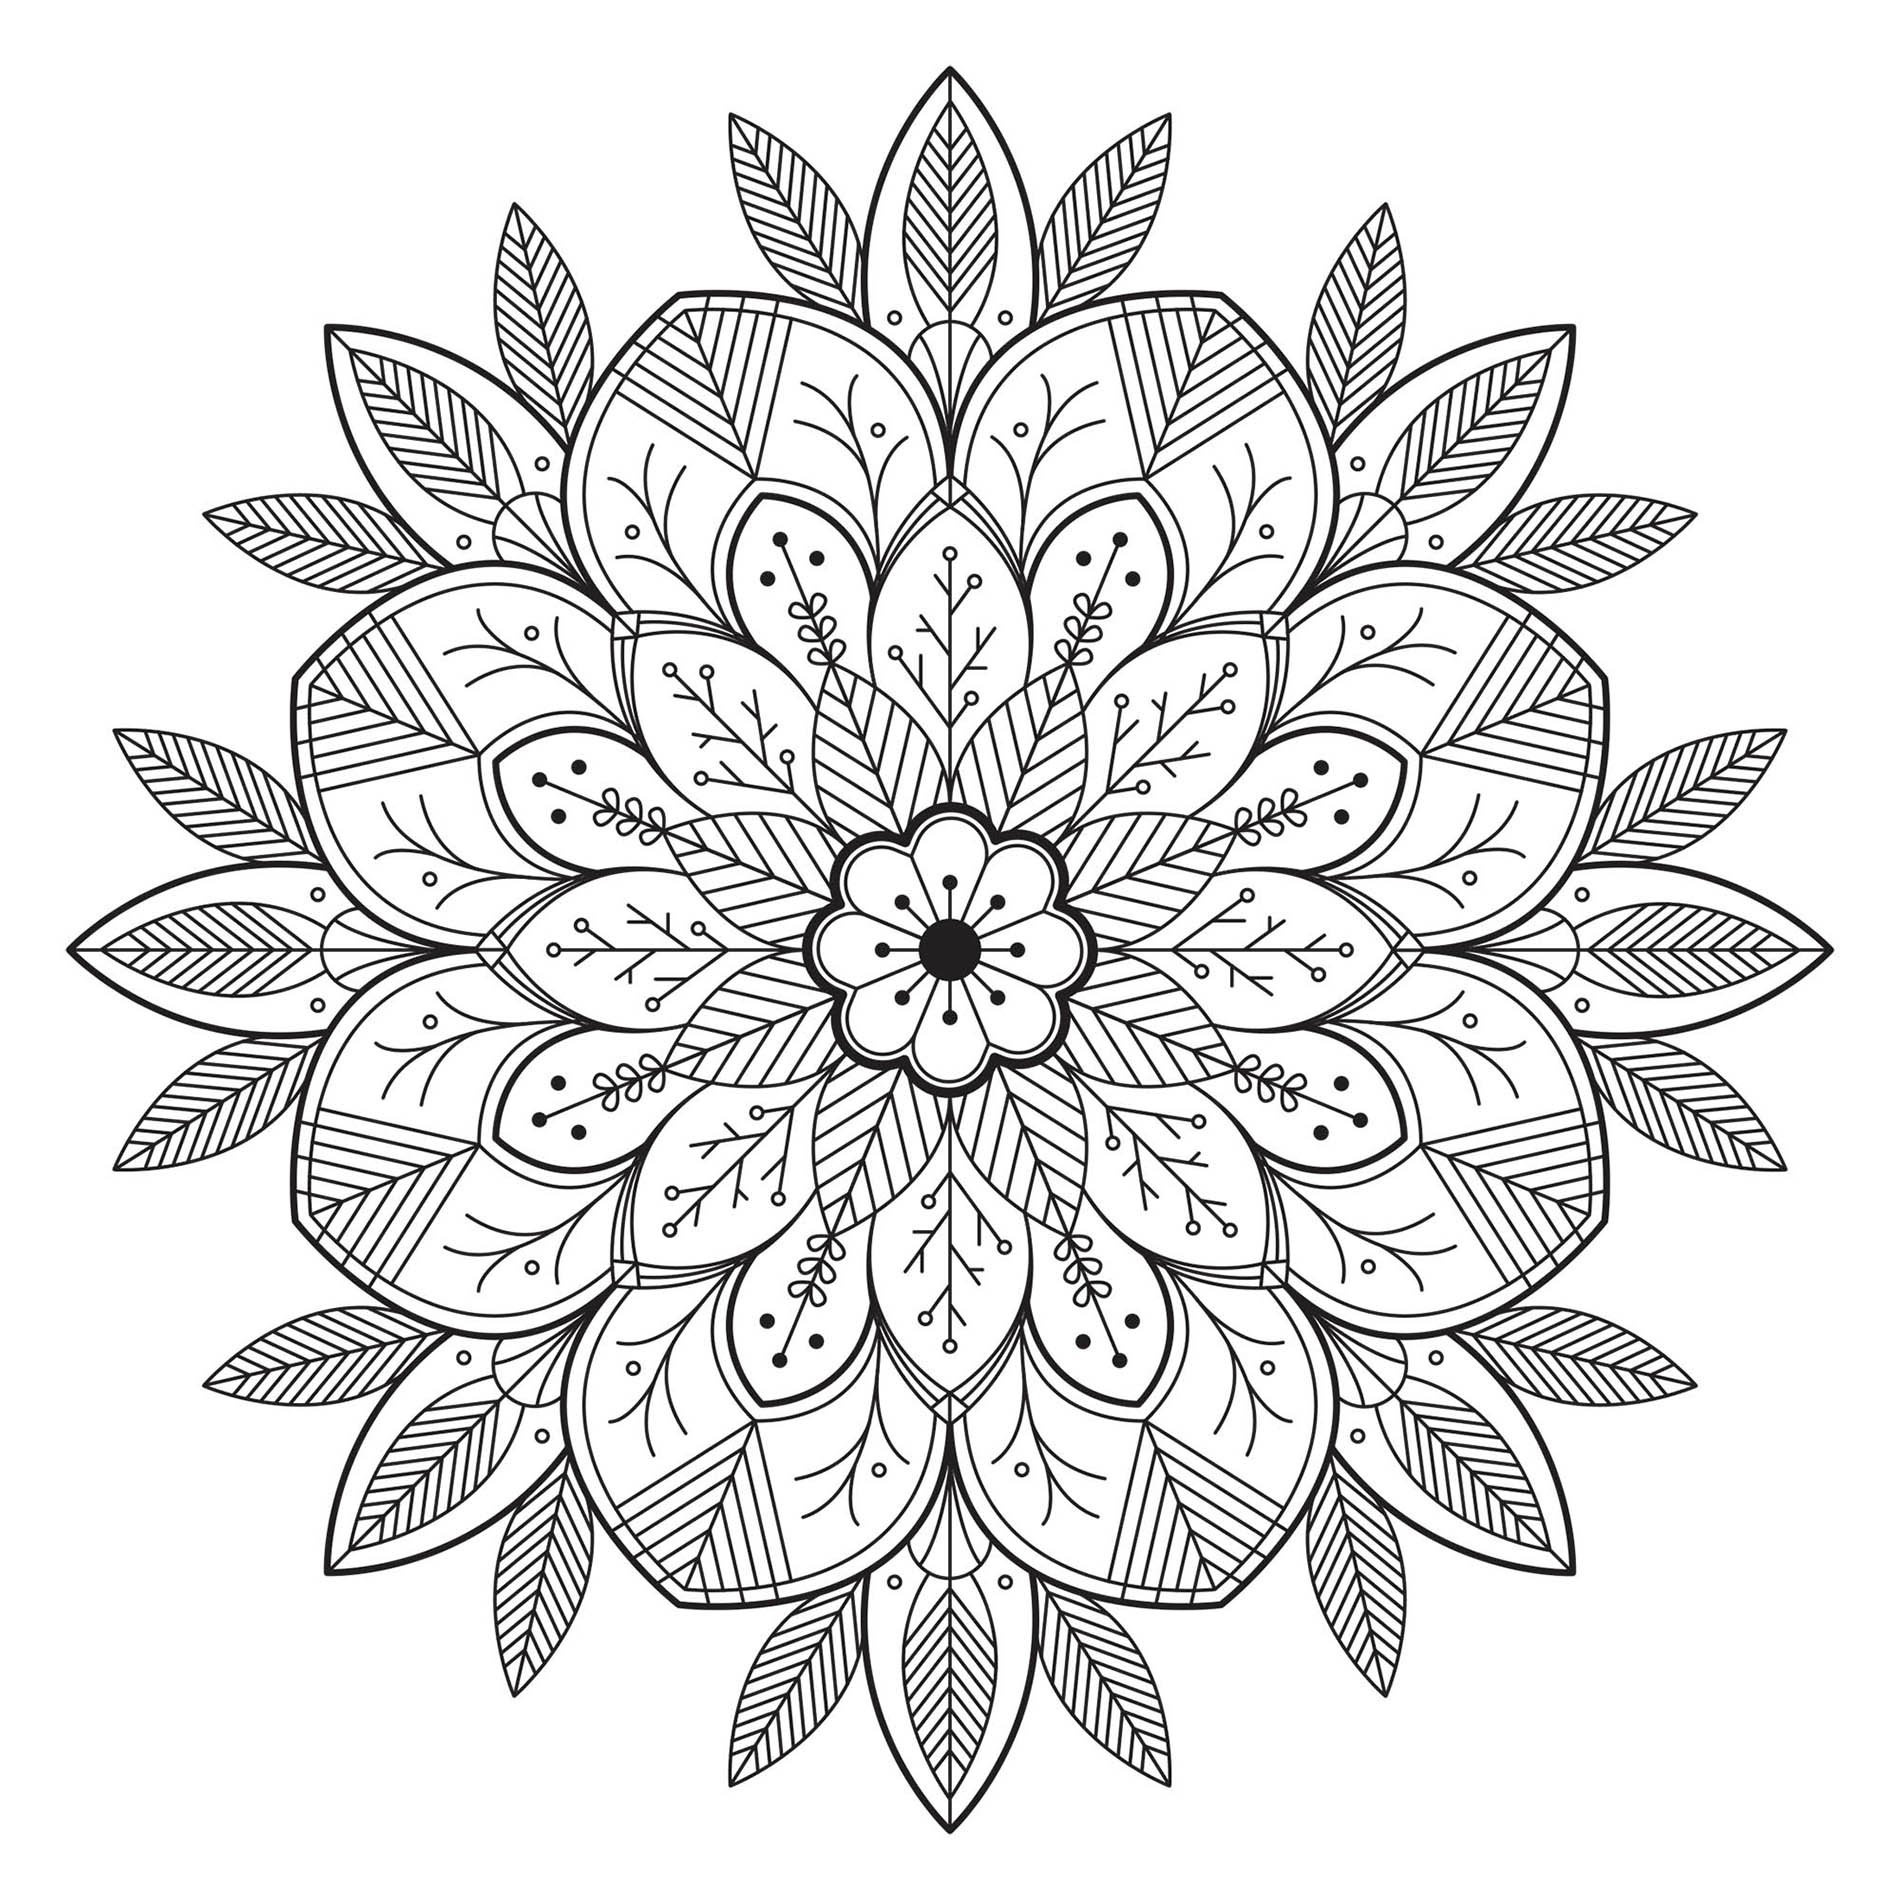 Mandala Leaves And Flowers Coloring Page